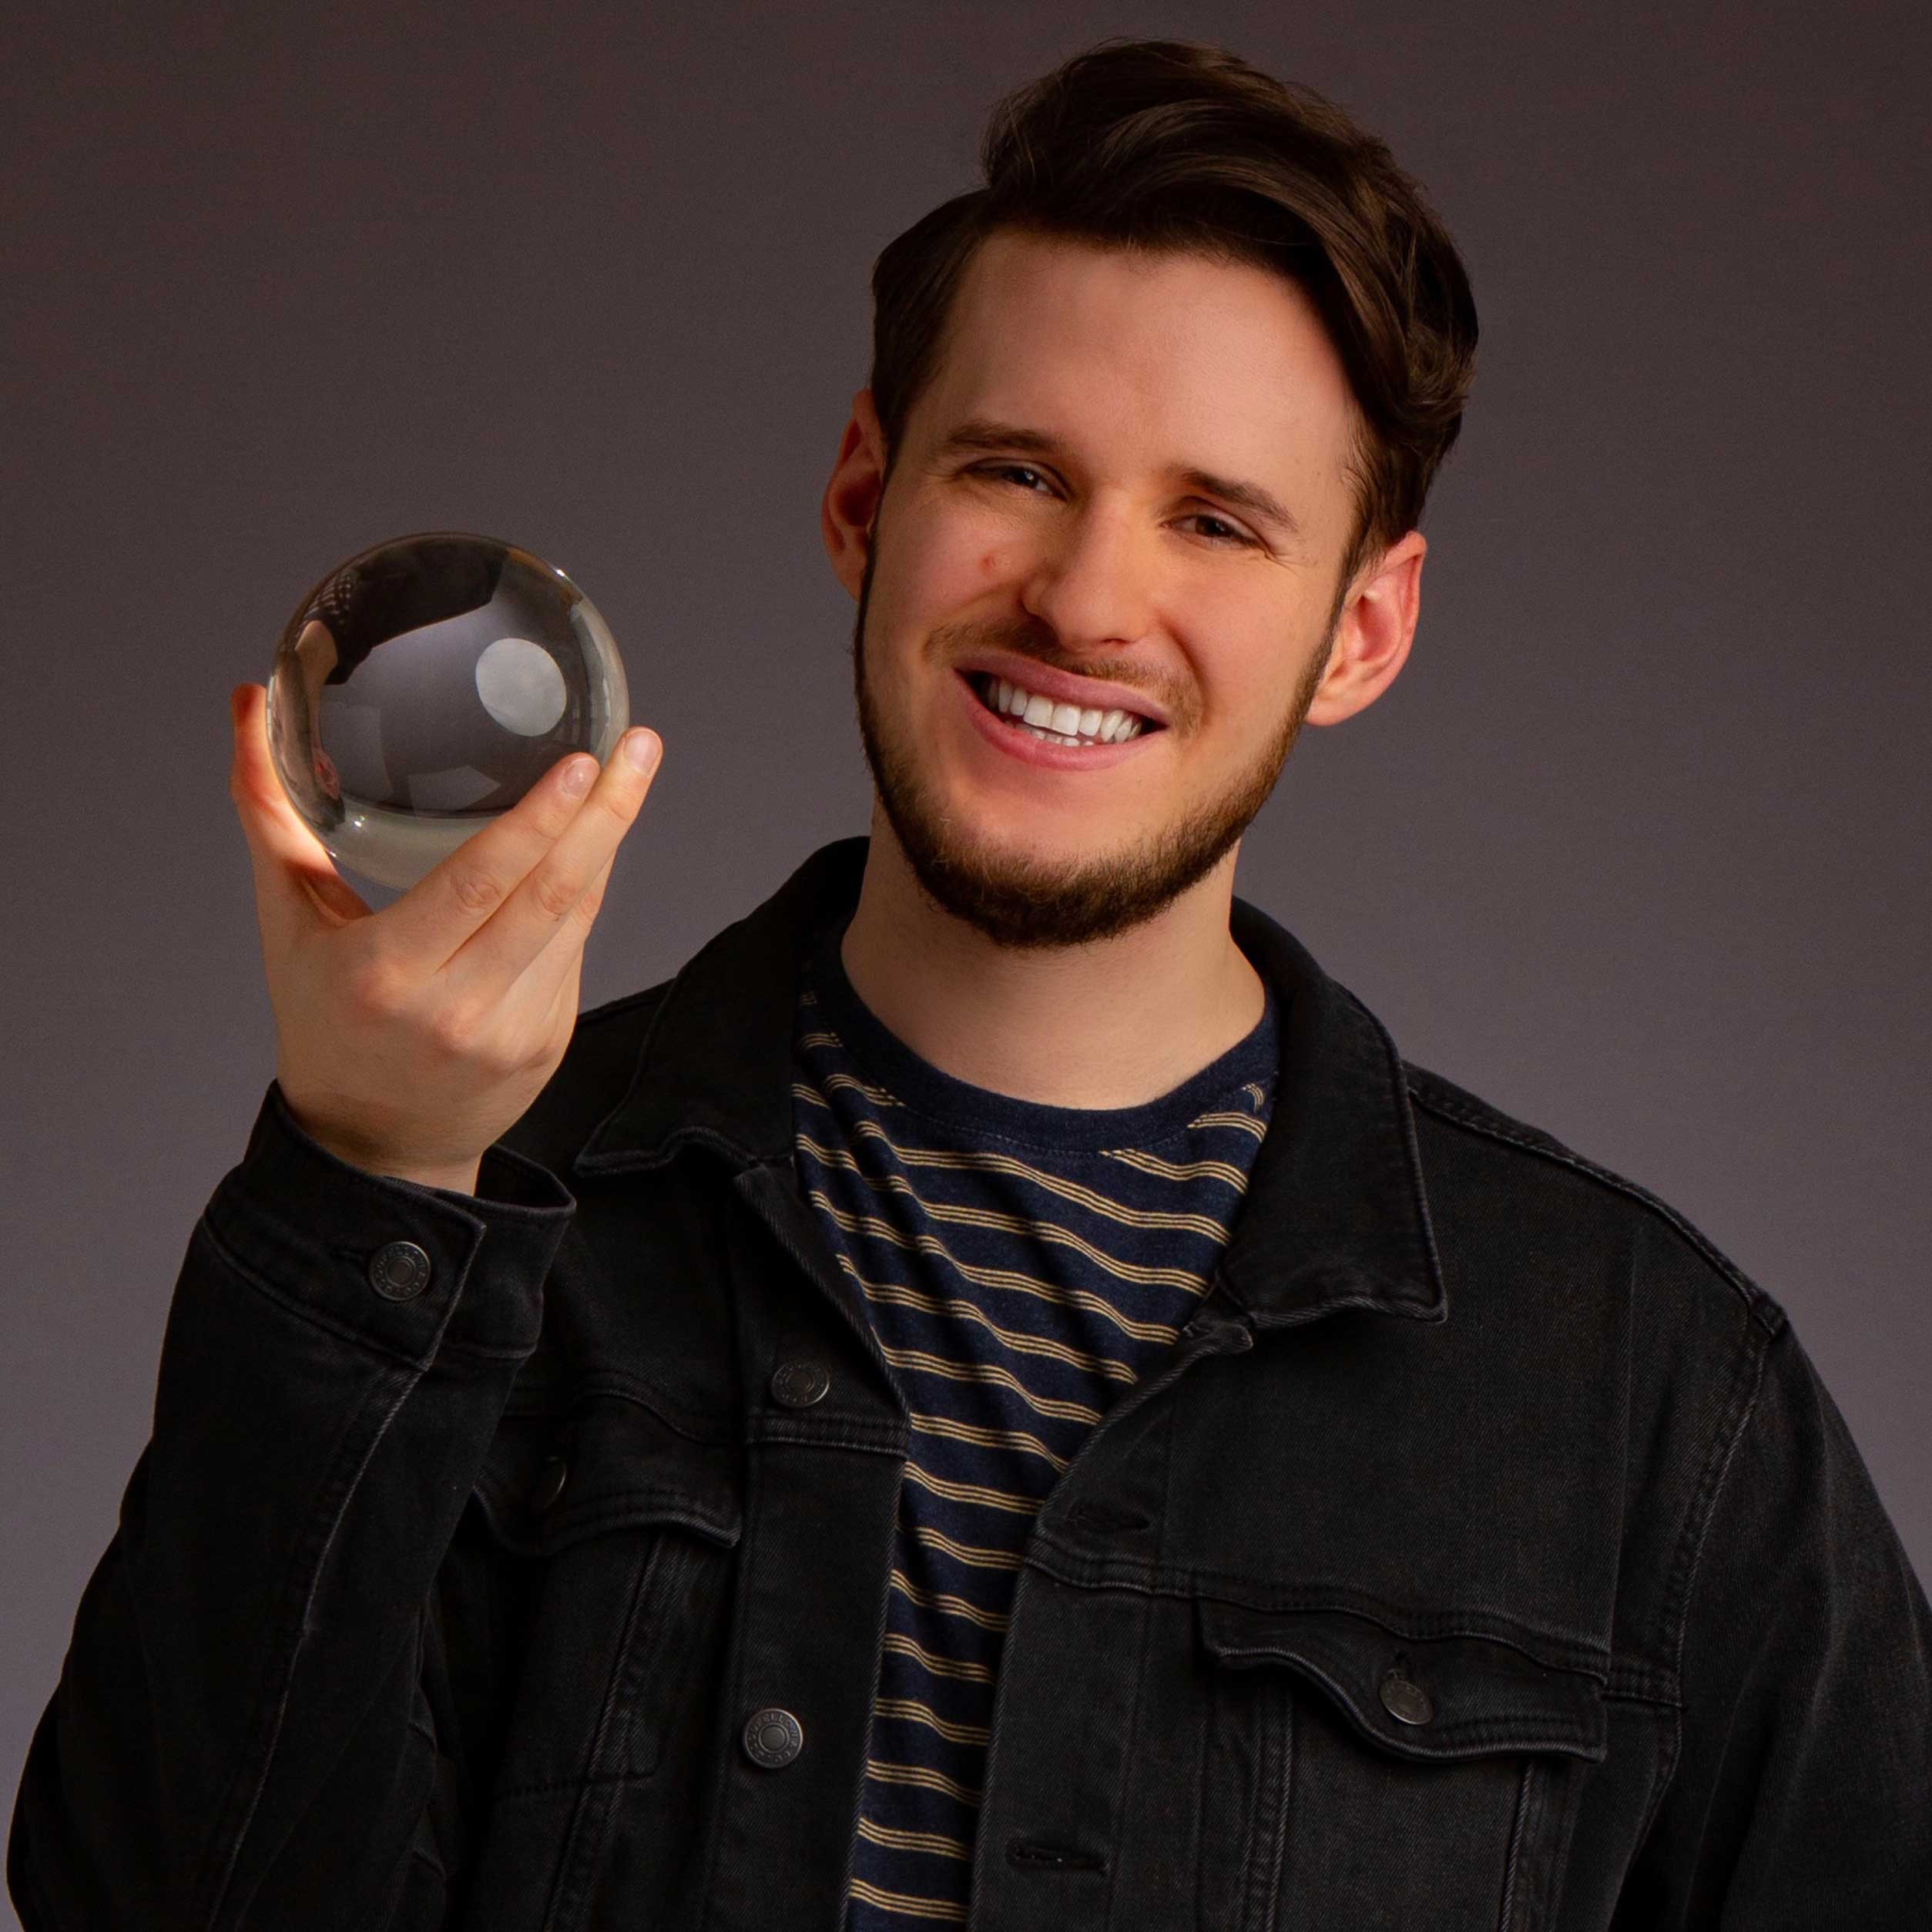 Jacob Mayfield smiling while holding crystal ball in hand wearing a black denim jacket over a striped shirt.